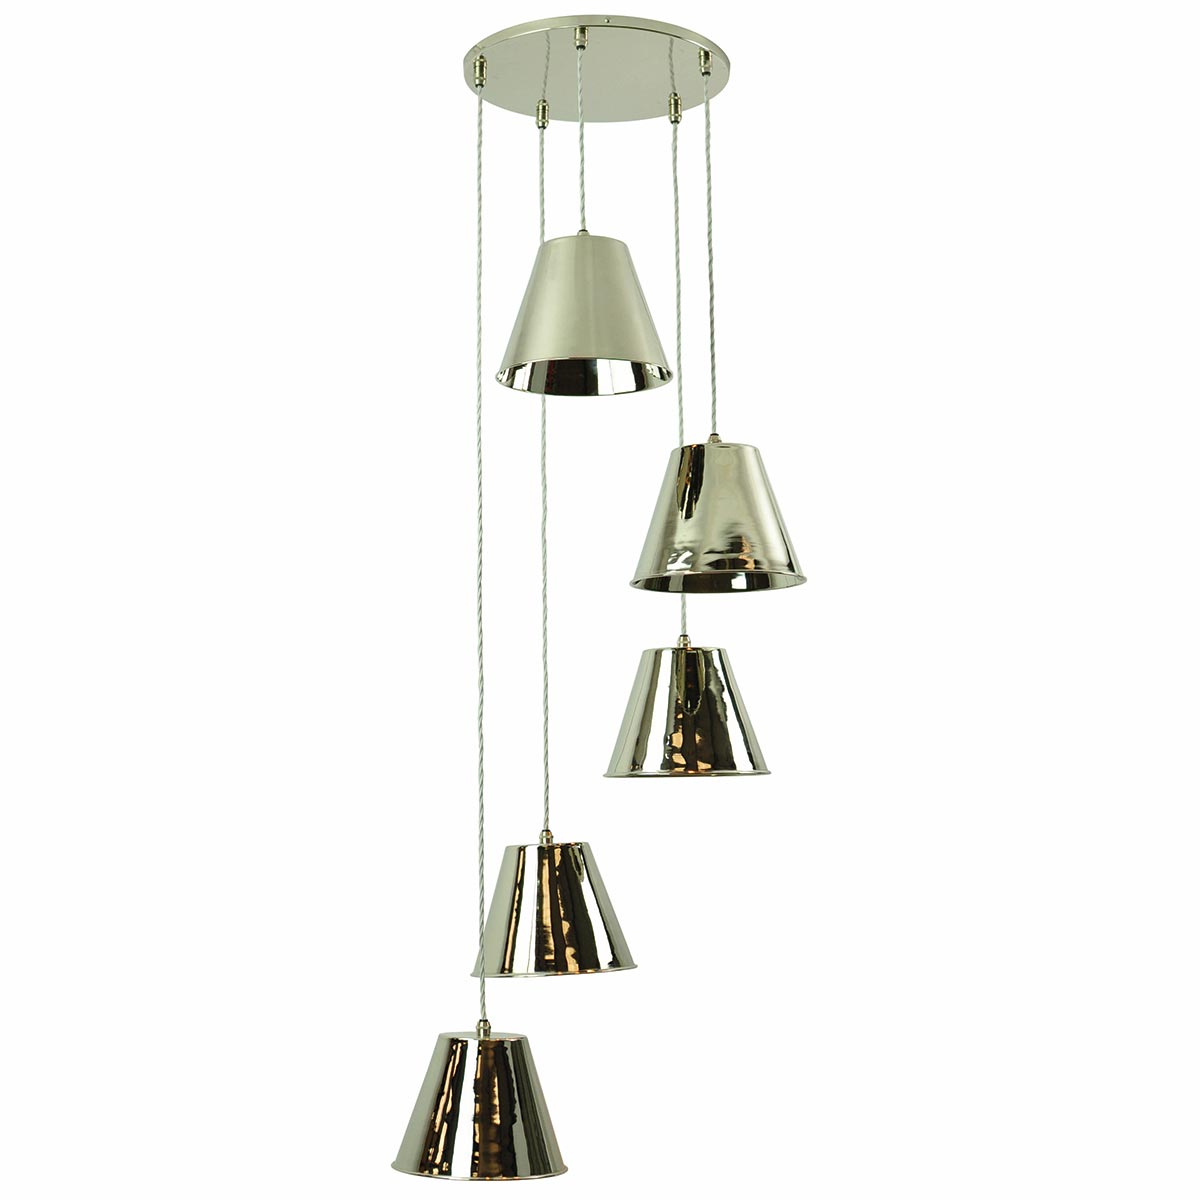 Map Room Nautical Style 5 Light Cluster Pendant Polished Nickel